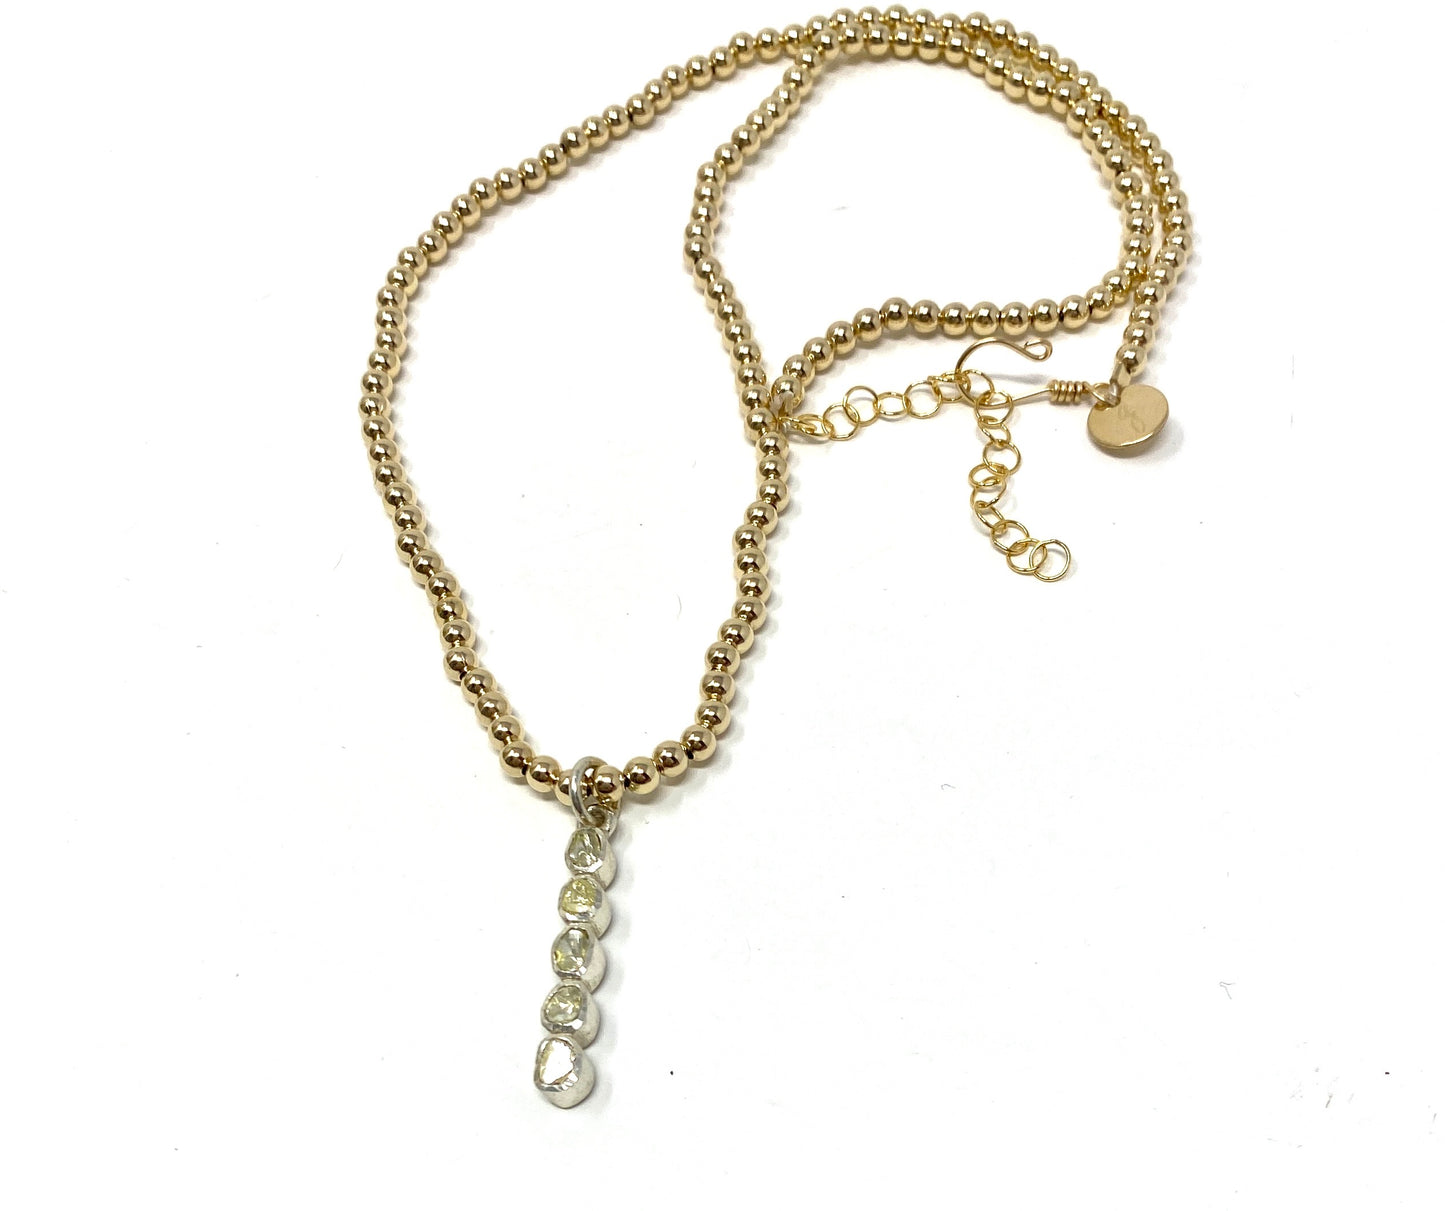 3mm Gold Filled Beaded Necklace With 5 Rosecut Diamond Pendant